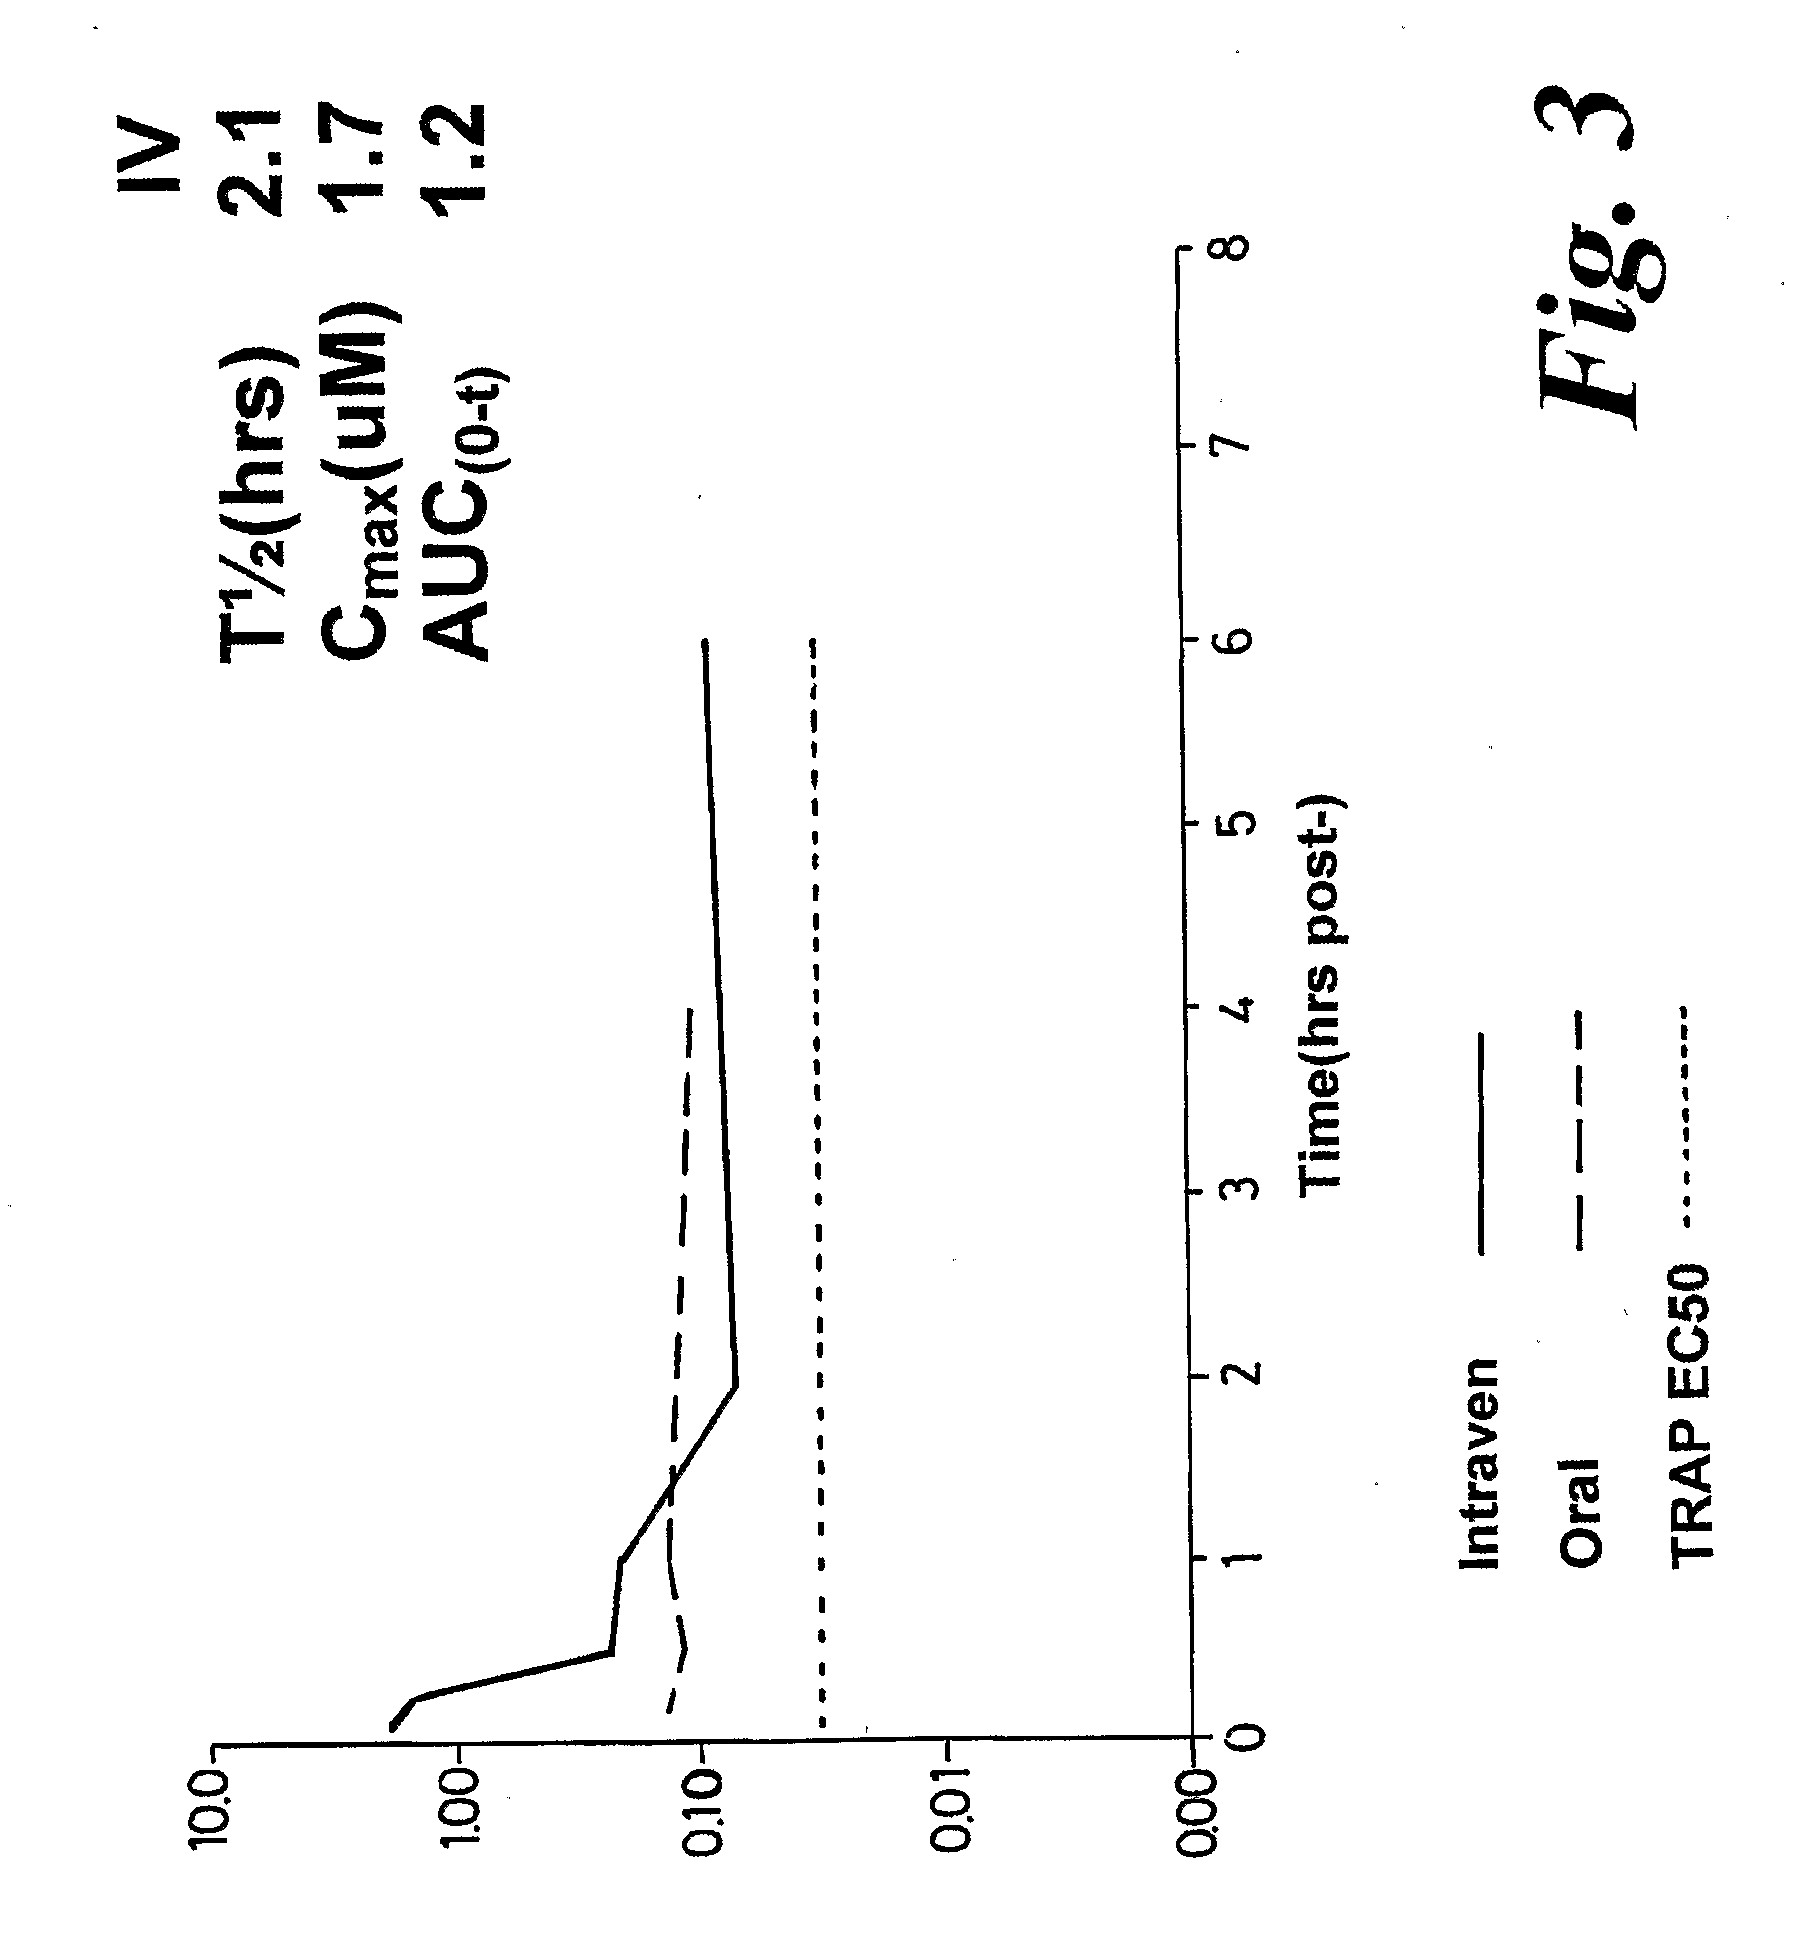 Cancer Treatment Using Specific 3,6,9-Substituted Acridines